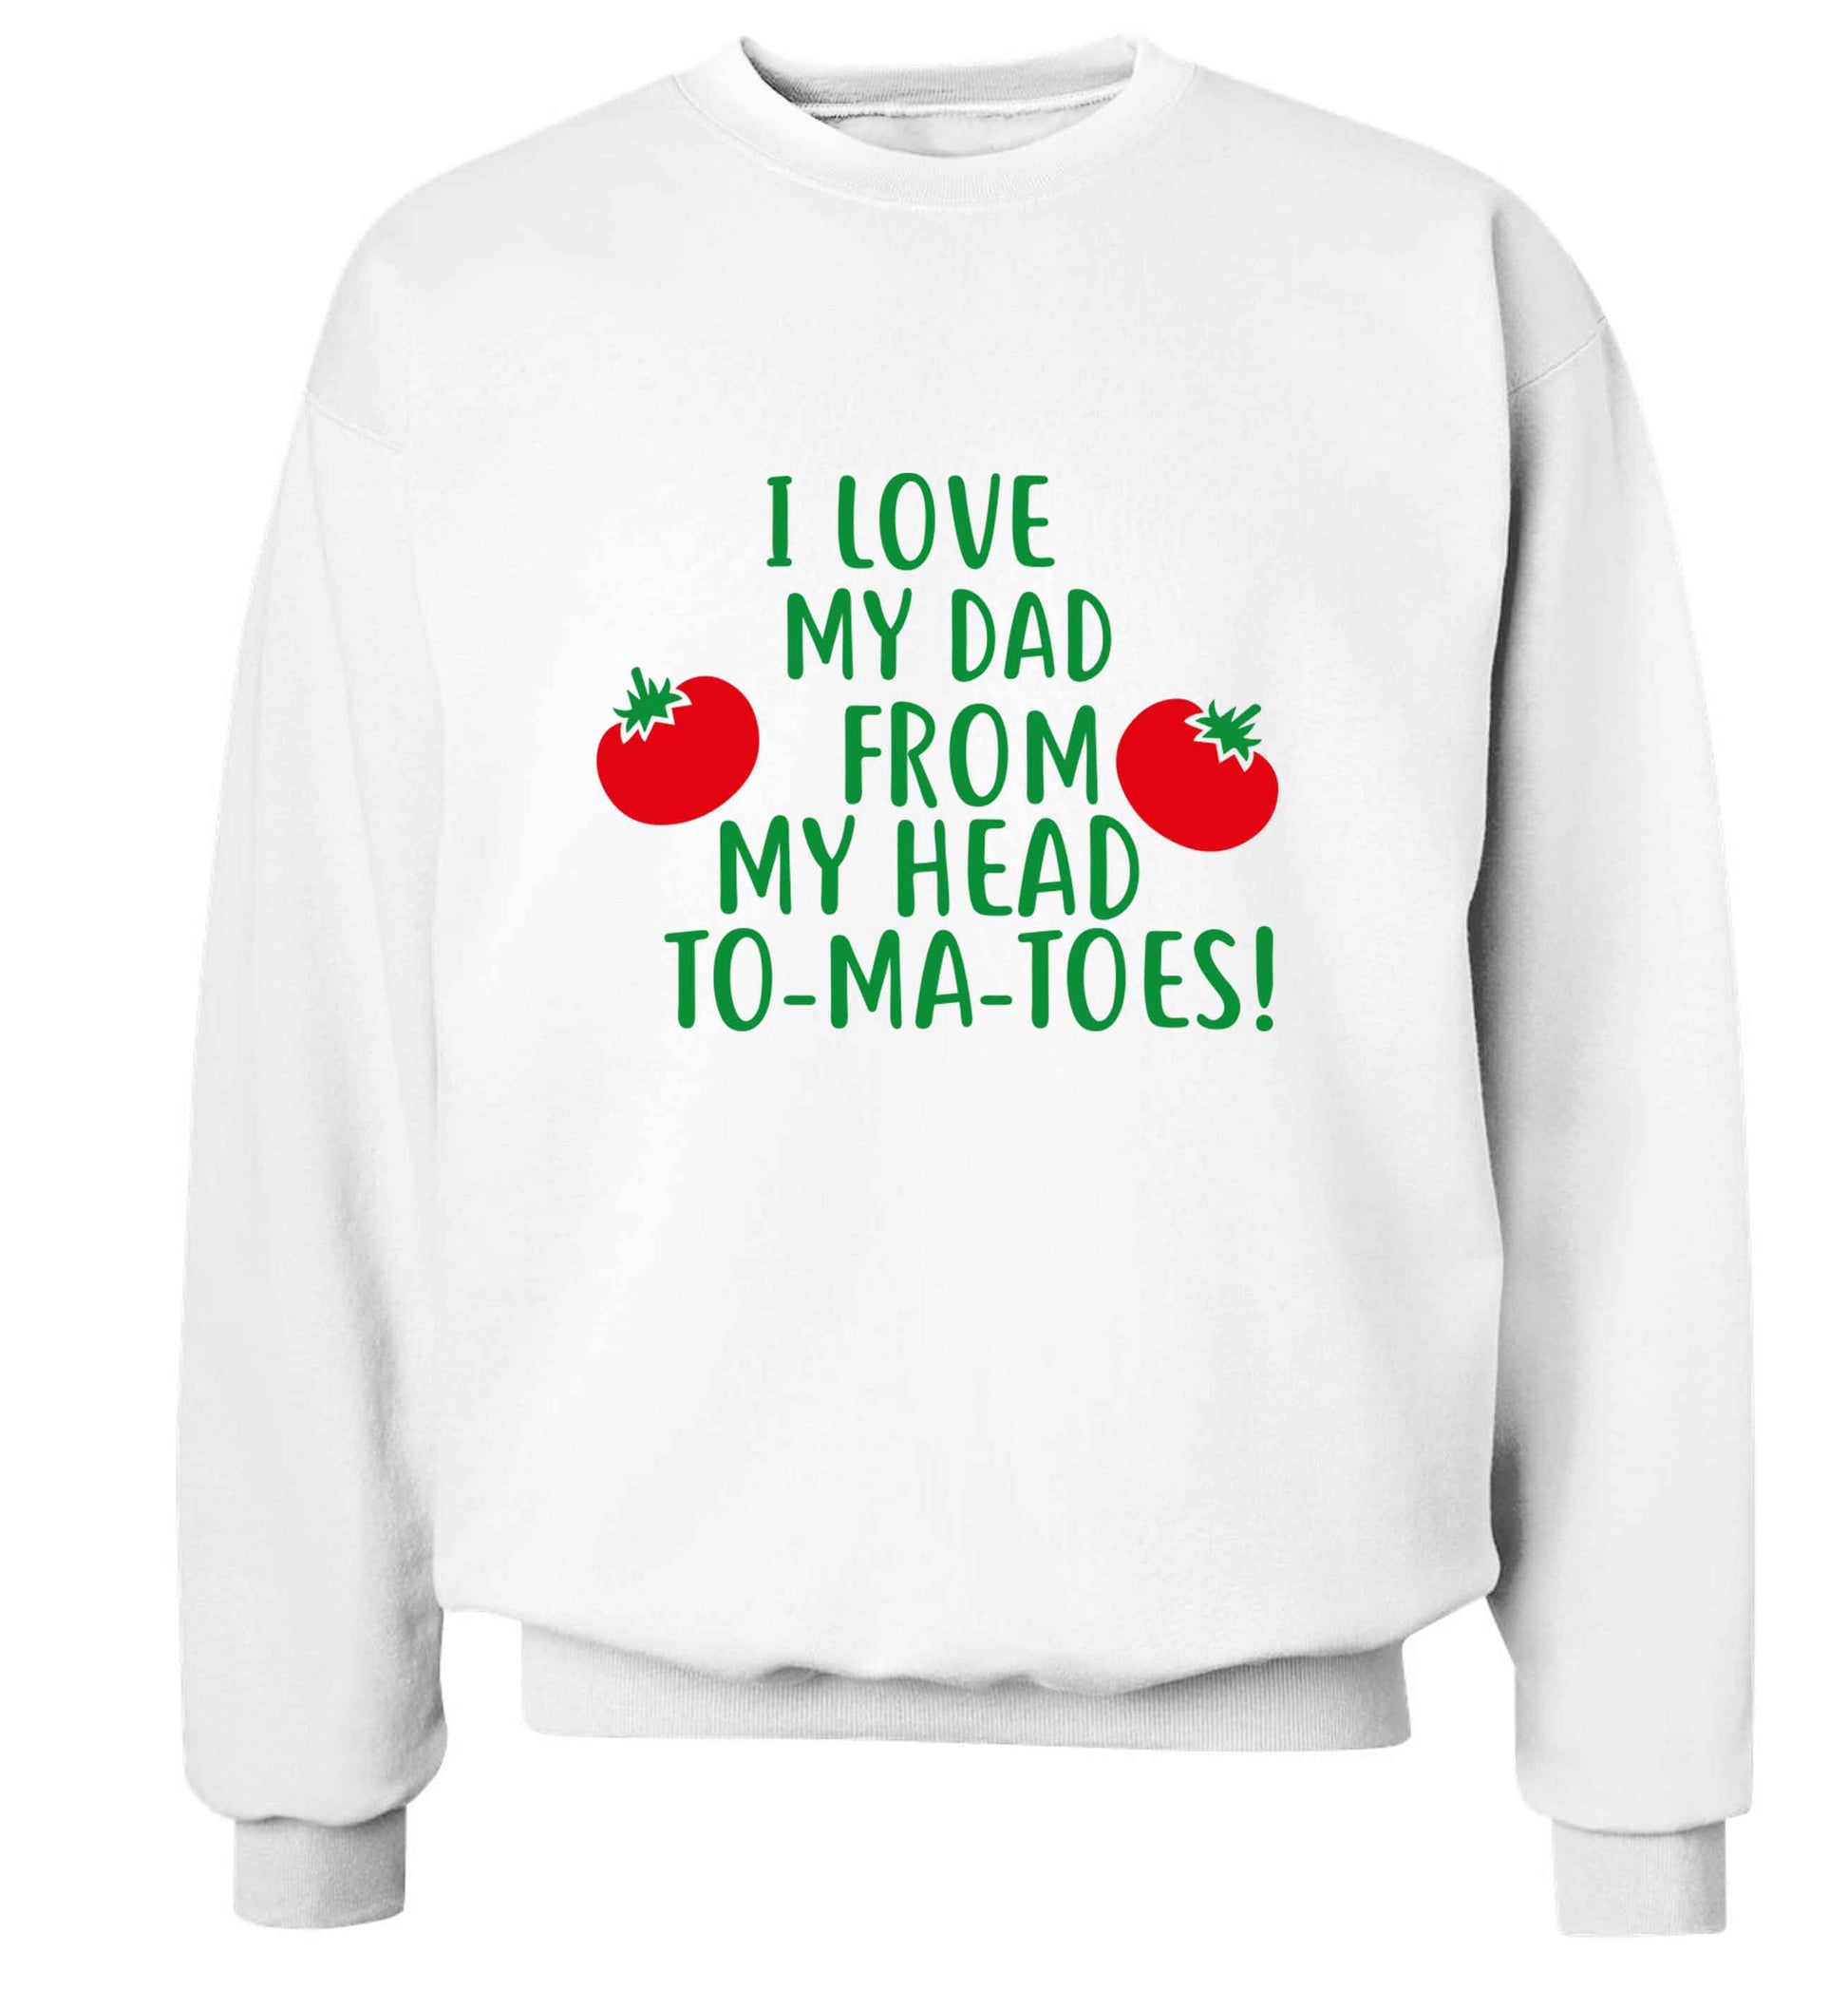 I love my dad from my head to-ma-toes adult's unisex white sweater 2XL